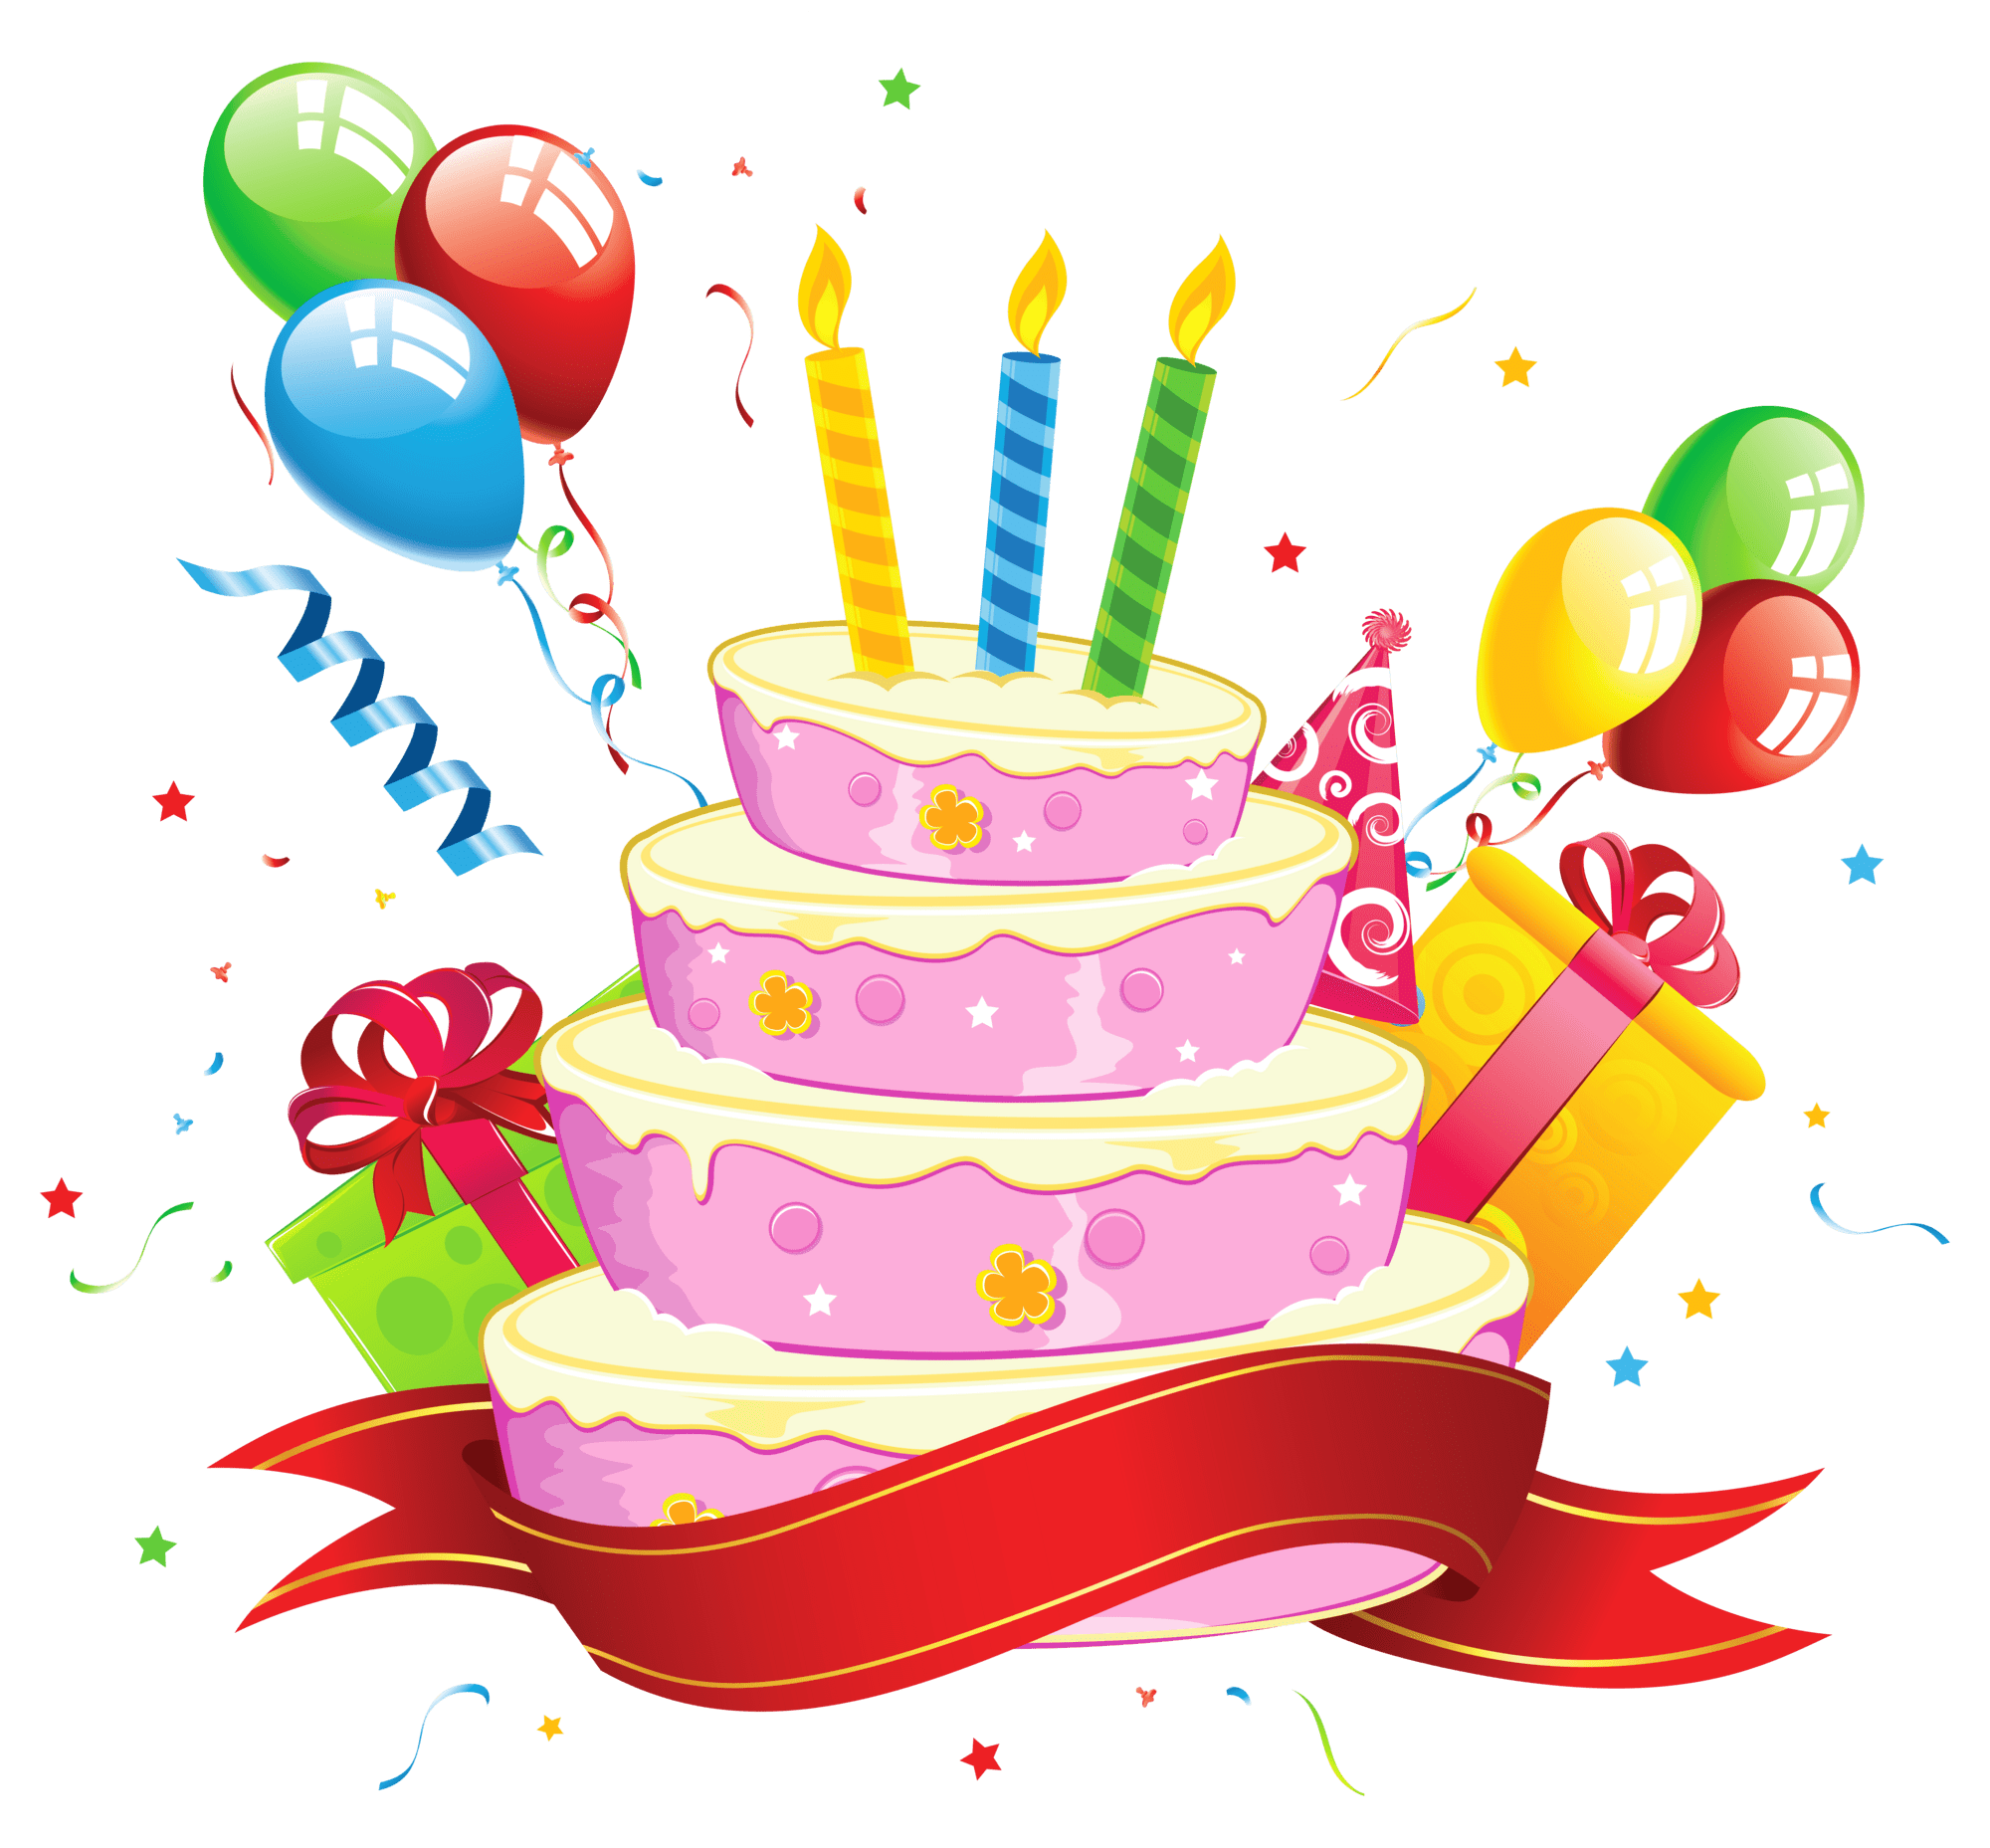 Birthday party cake clipart free